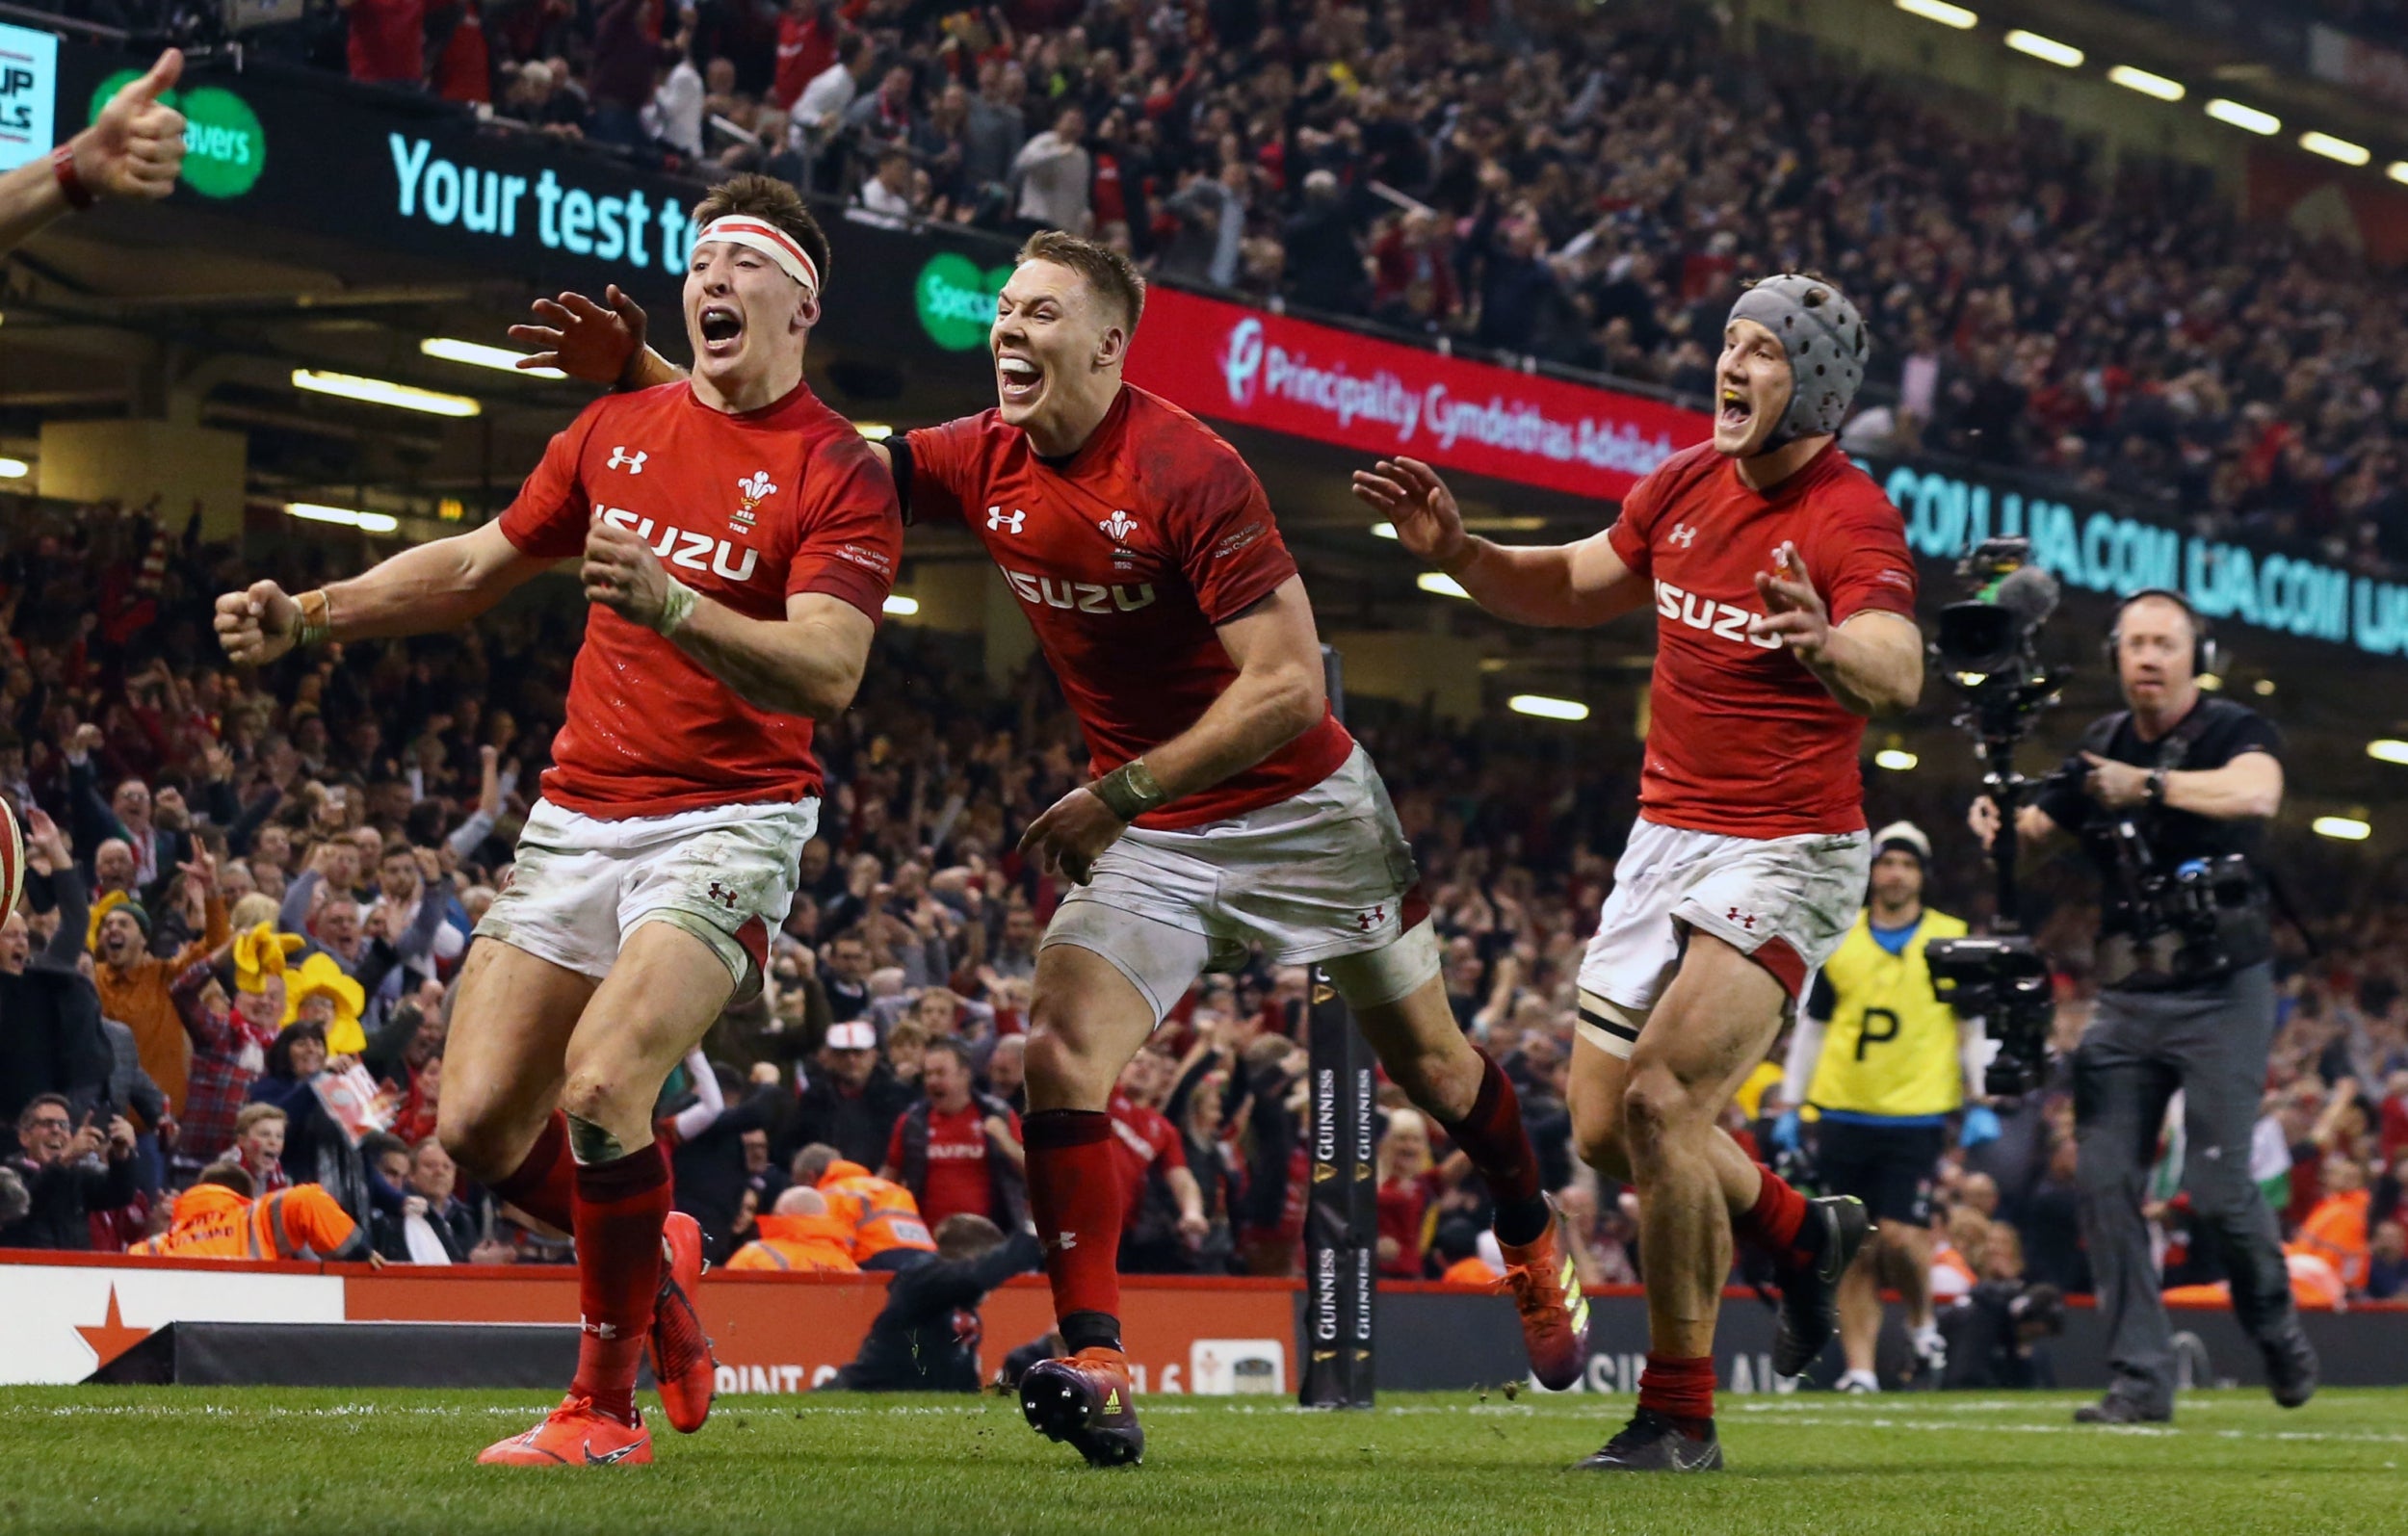 Wales vs England player ratings Josh Adams and Liam Williams deliver